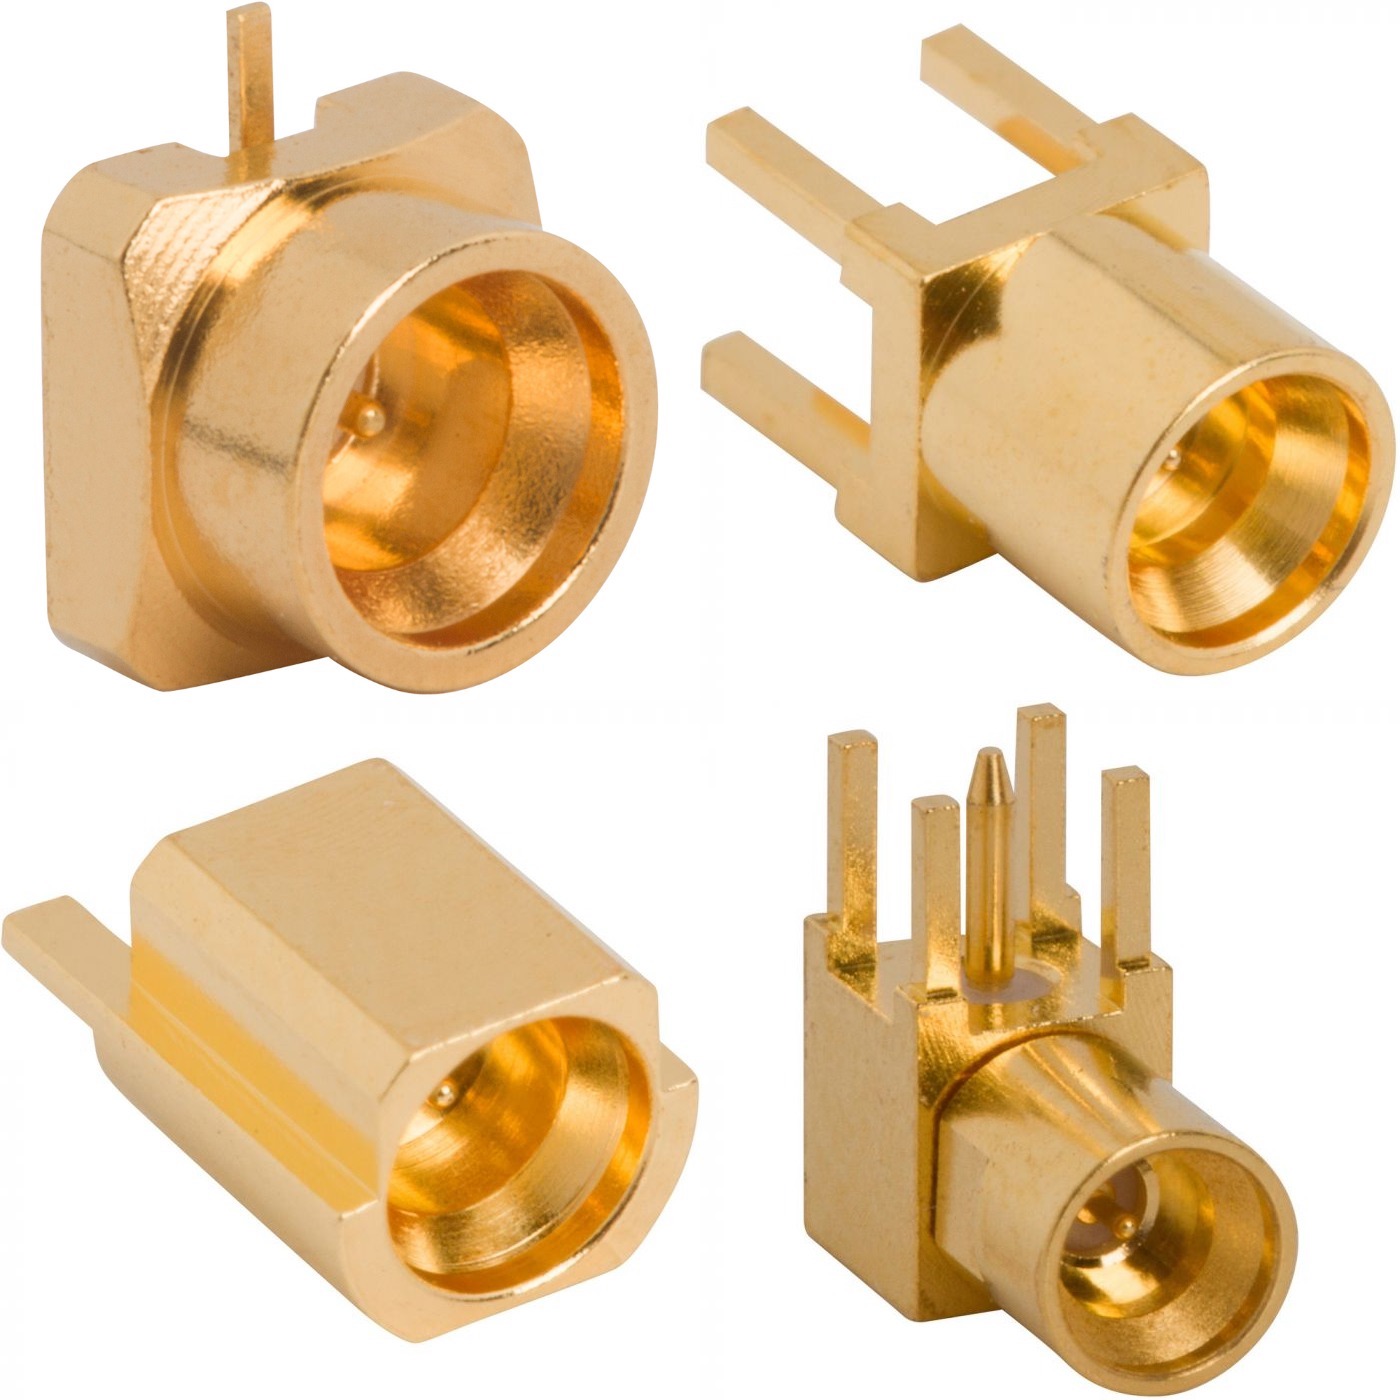 Allied Electronics & Automation supplies Amphenol RF’s line of 50Ω SMPM connectors